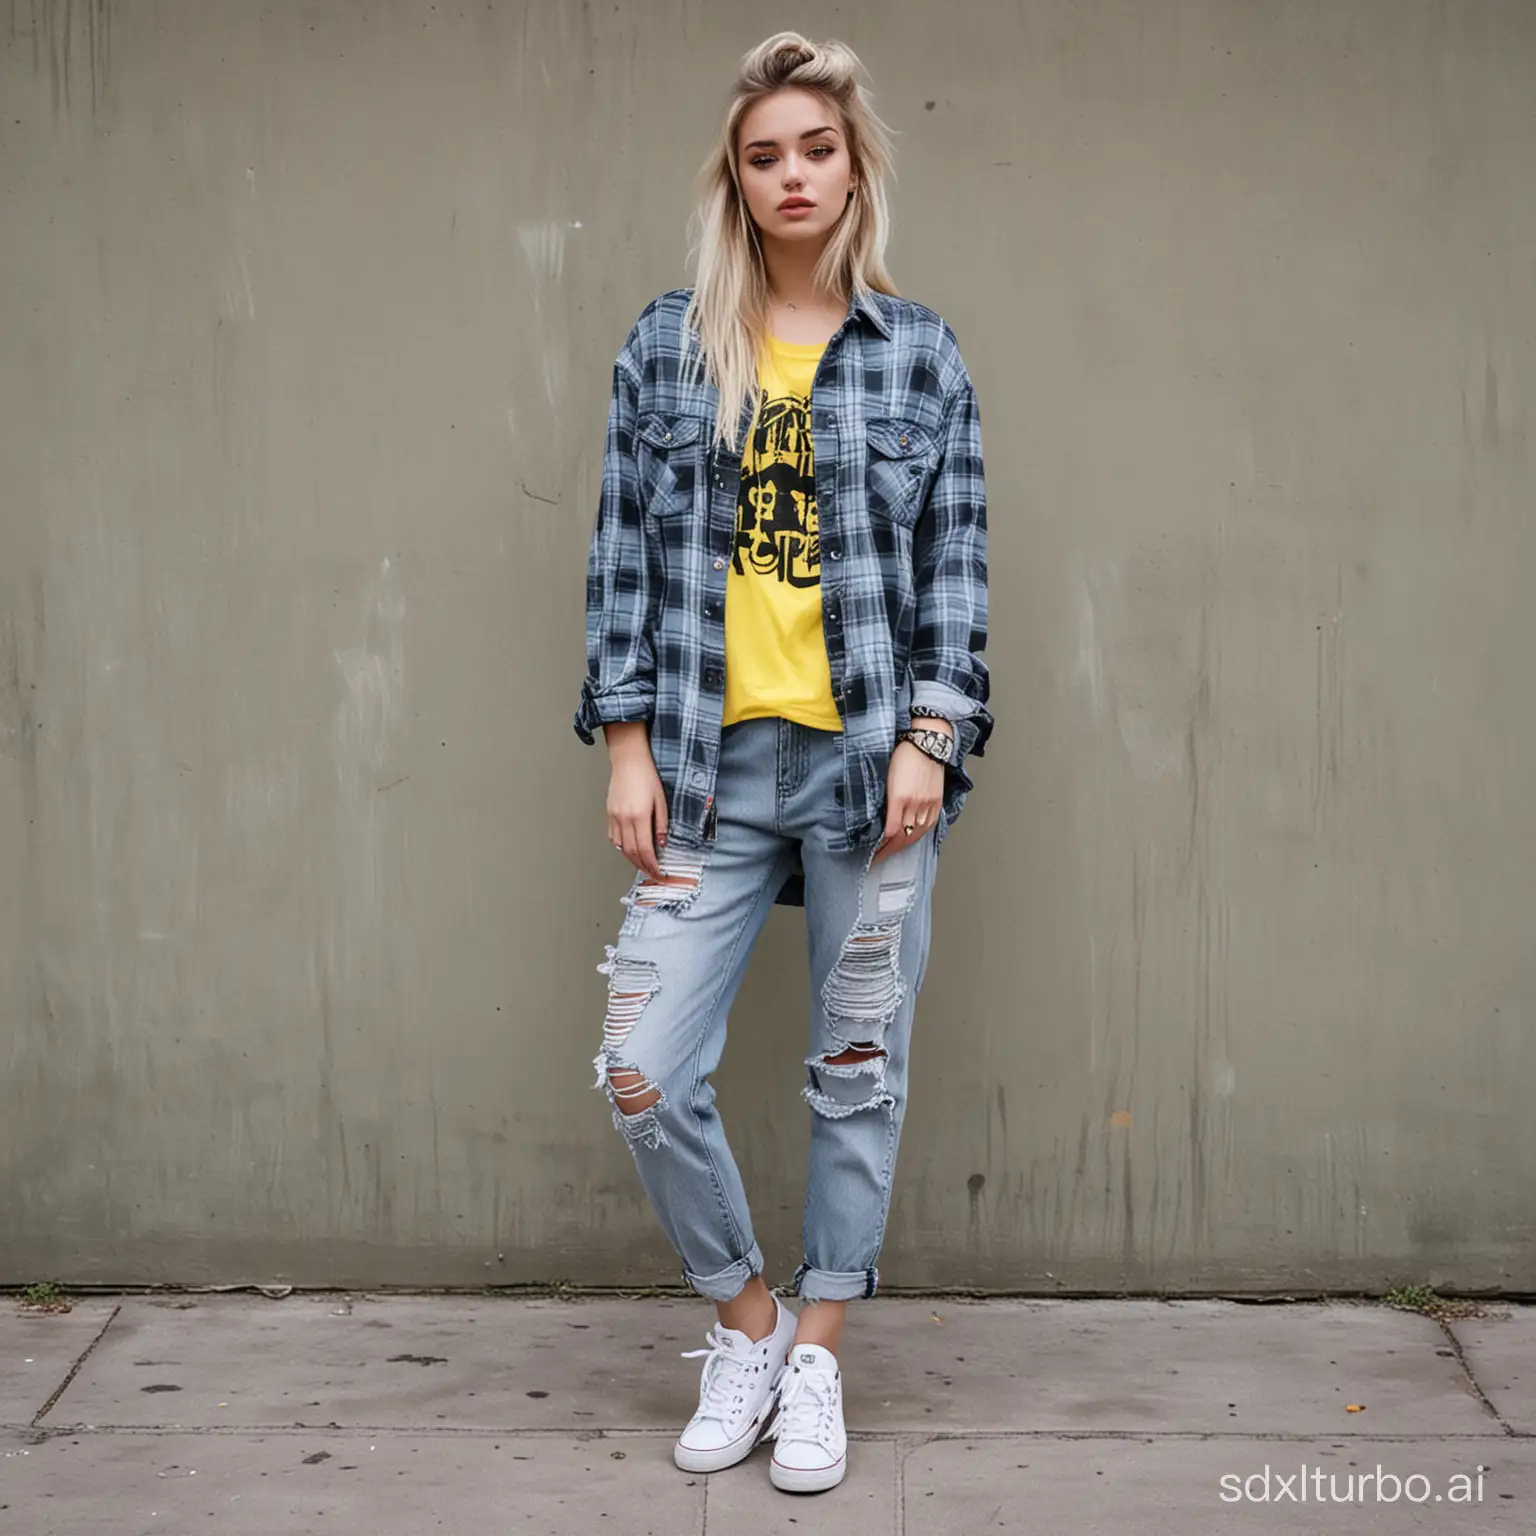 Grunge-Fashion-Portrait-Edgy-Girl-in-Distressed-Jeans-and-Ripped-Flannel-Shirt